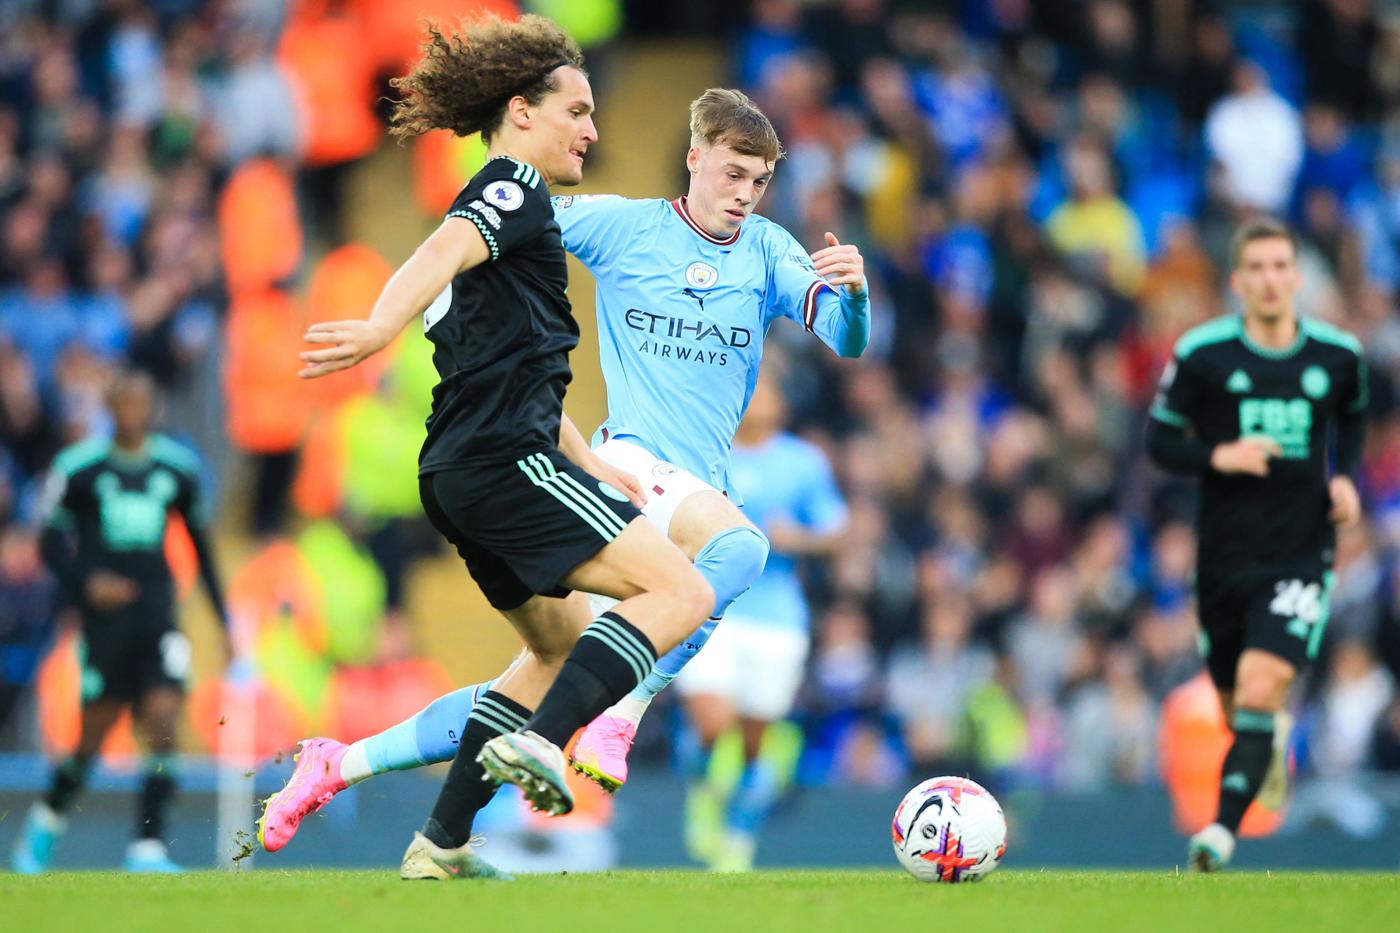 Man City - Leicester - 3:1. Championship of England, 31st round. Match review, statistics